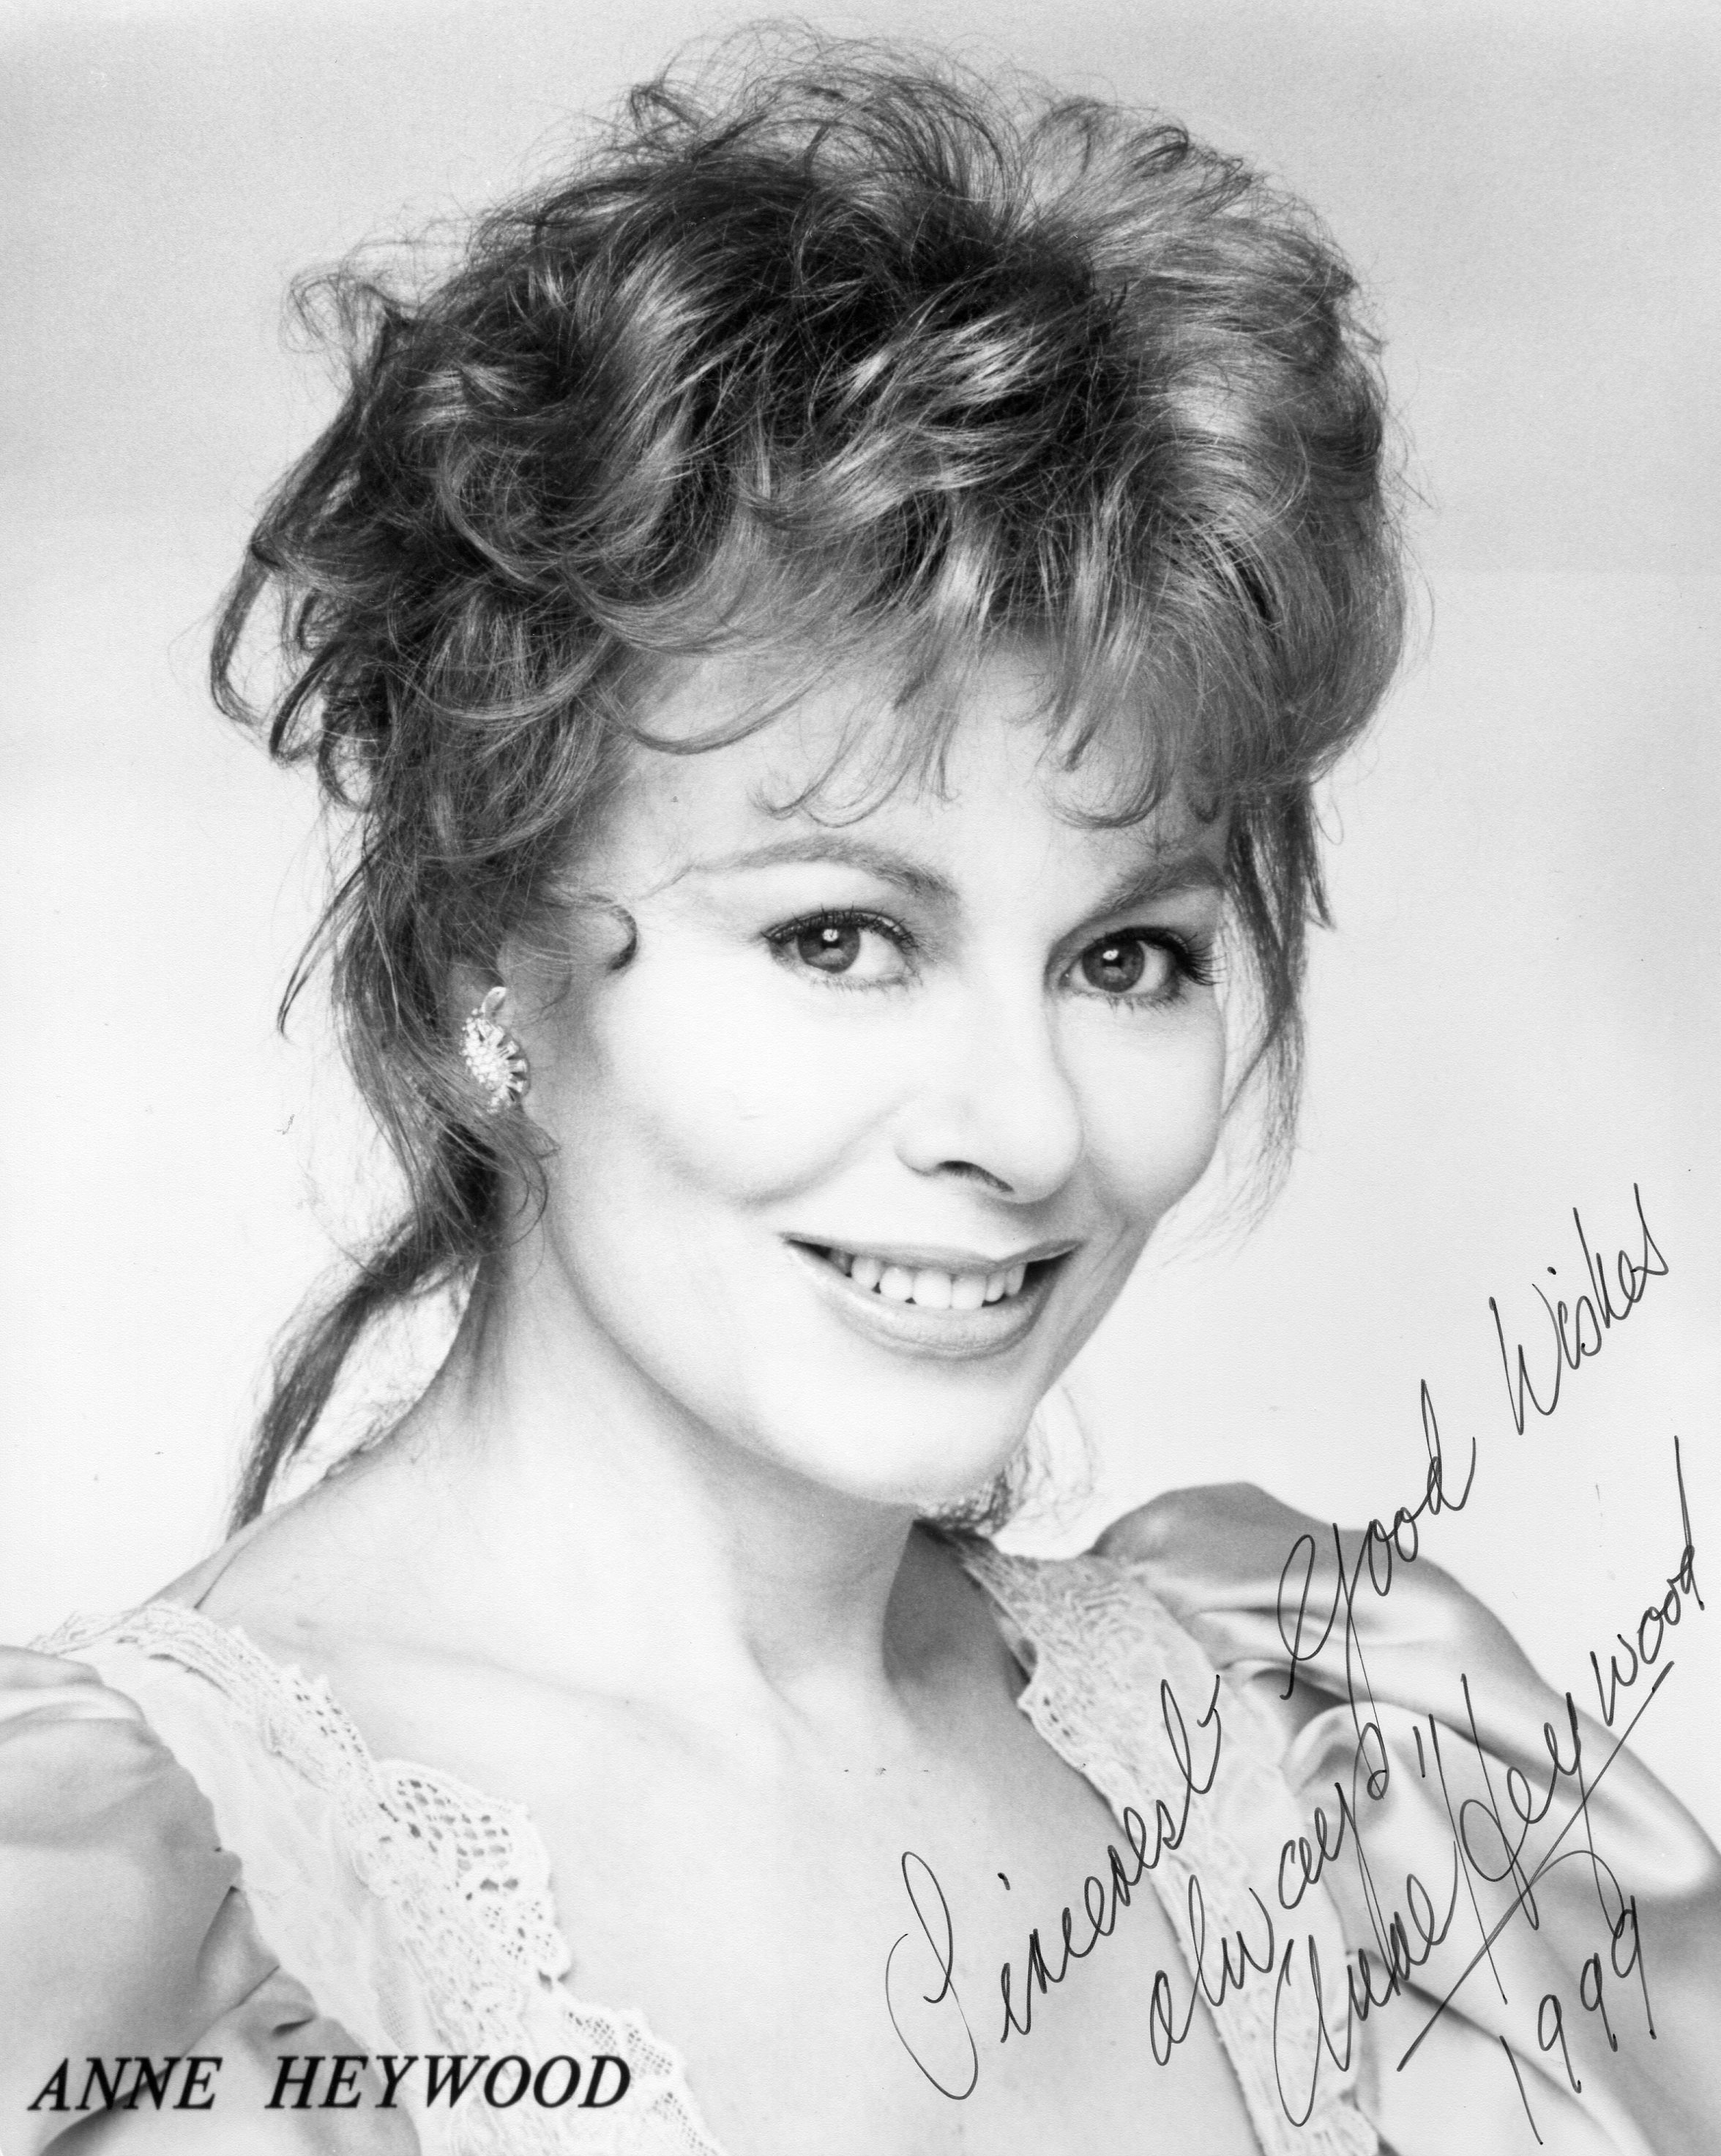 Anne Heywood – Movies & Autographed Portraits Through The Decades